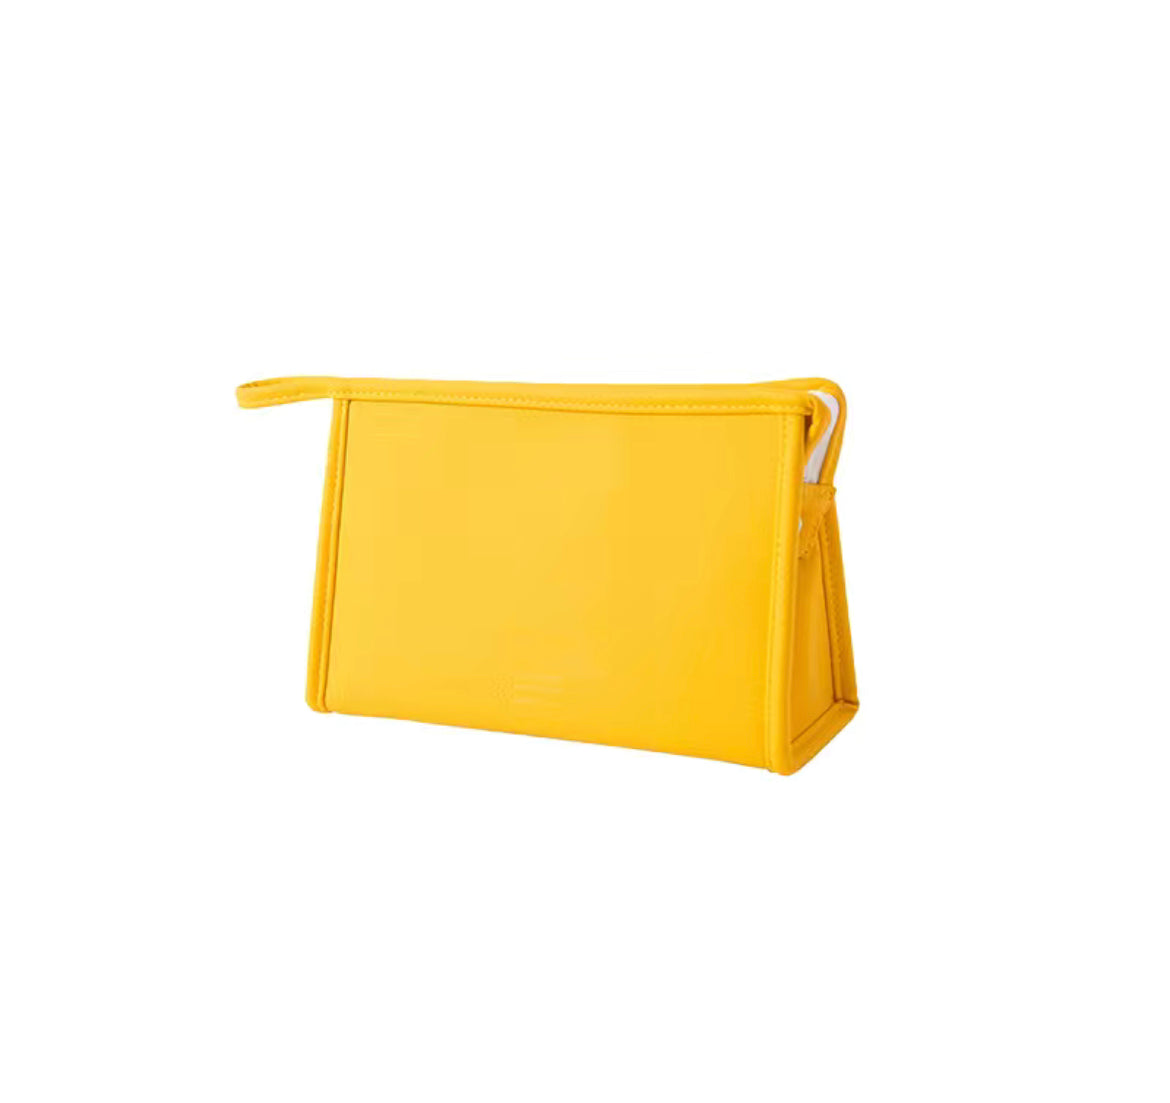 On Sale - LOVE Candy Color Cosmetic/Toiletry Bag